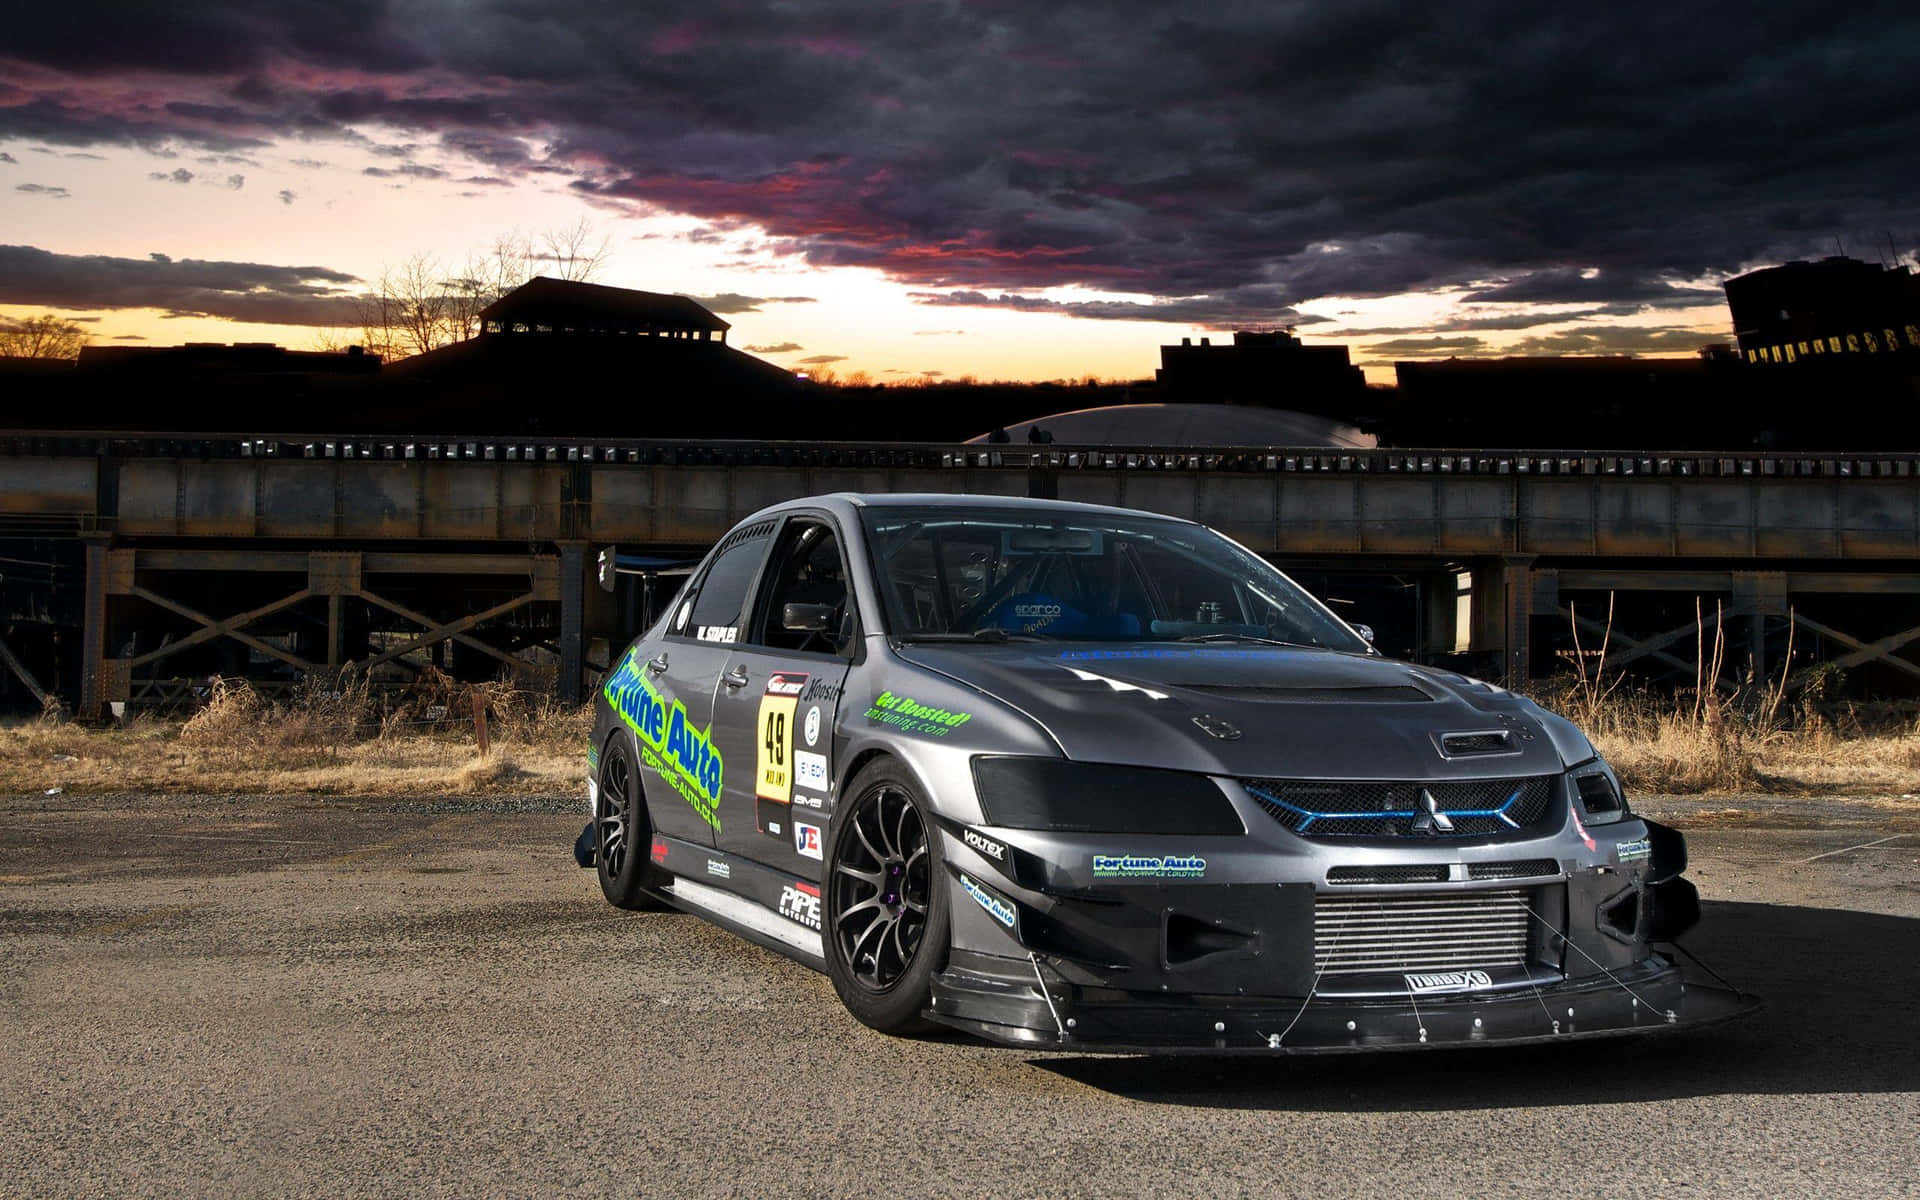 Stunning Tuned Car Showcasing Modified Design and Power Wallpaper